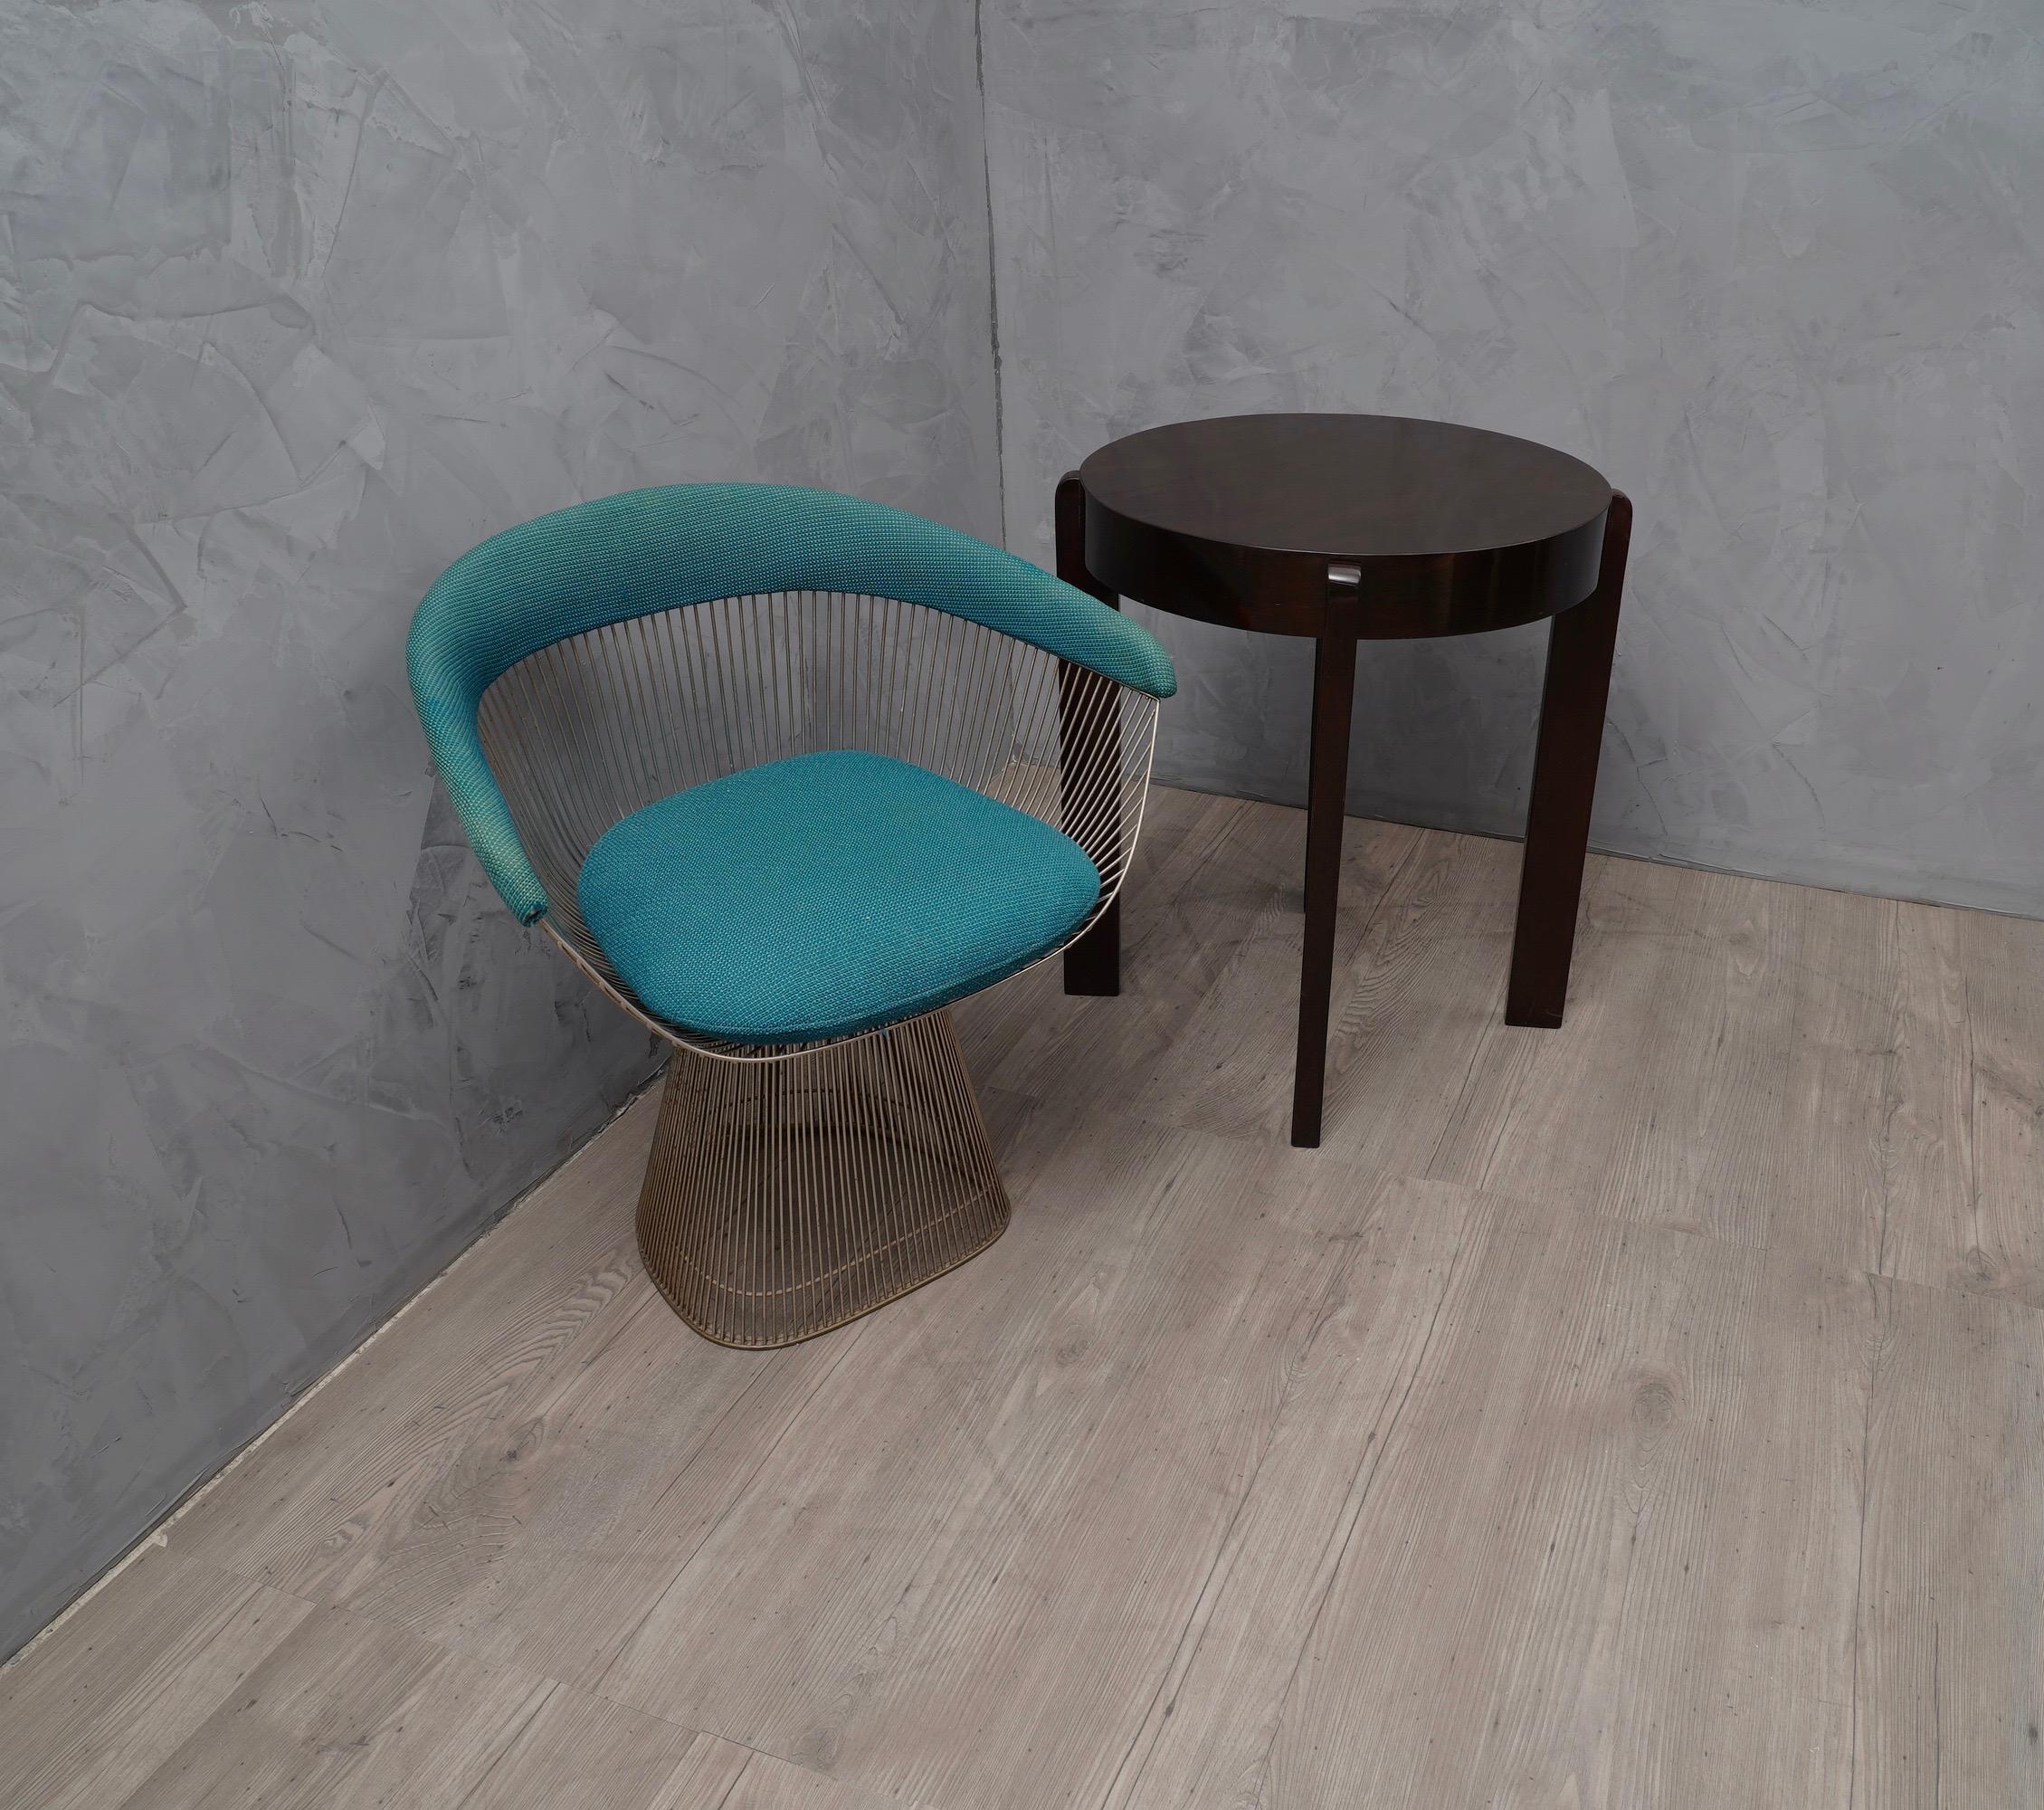 Simple but elegant workmanship for this side table, with slender legs and a beautiful patina project it in a refined style. Square, elegant, just the right size, the coffee table will give a luxurious look to your home.

All veneered in walnut wood